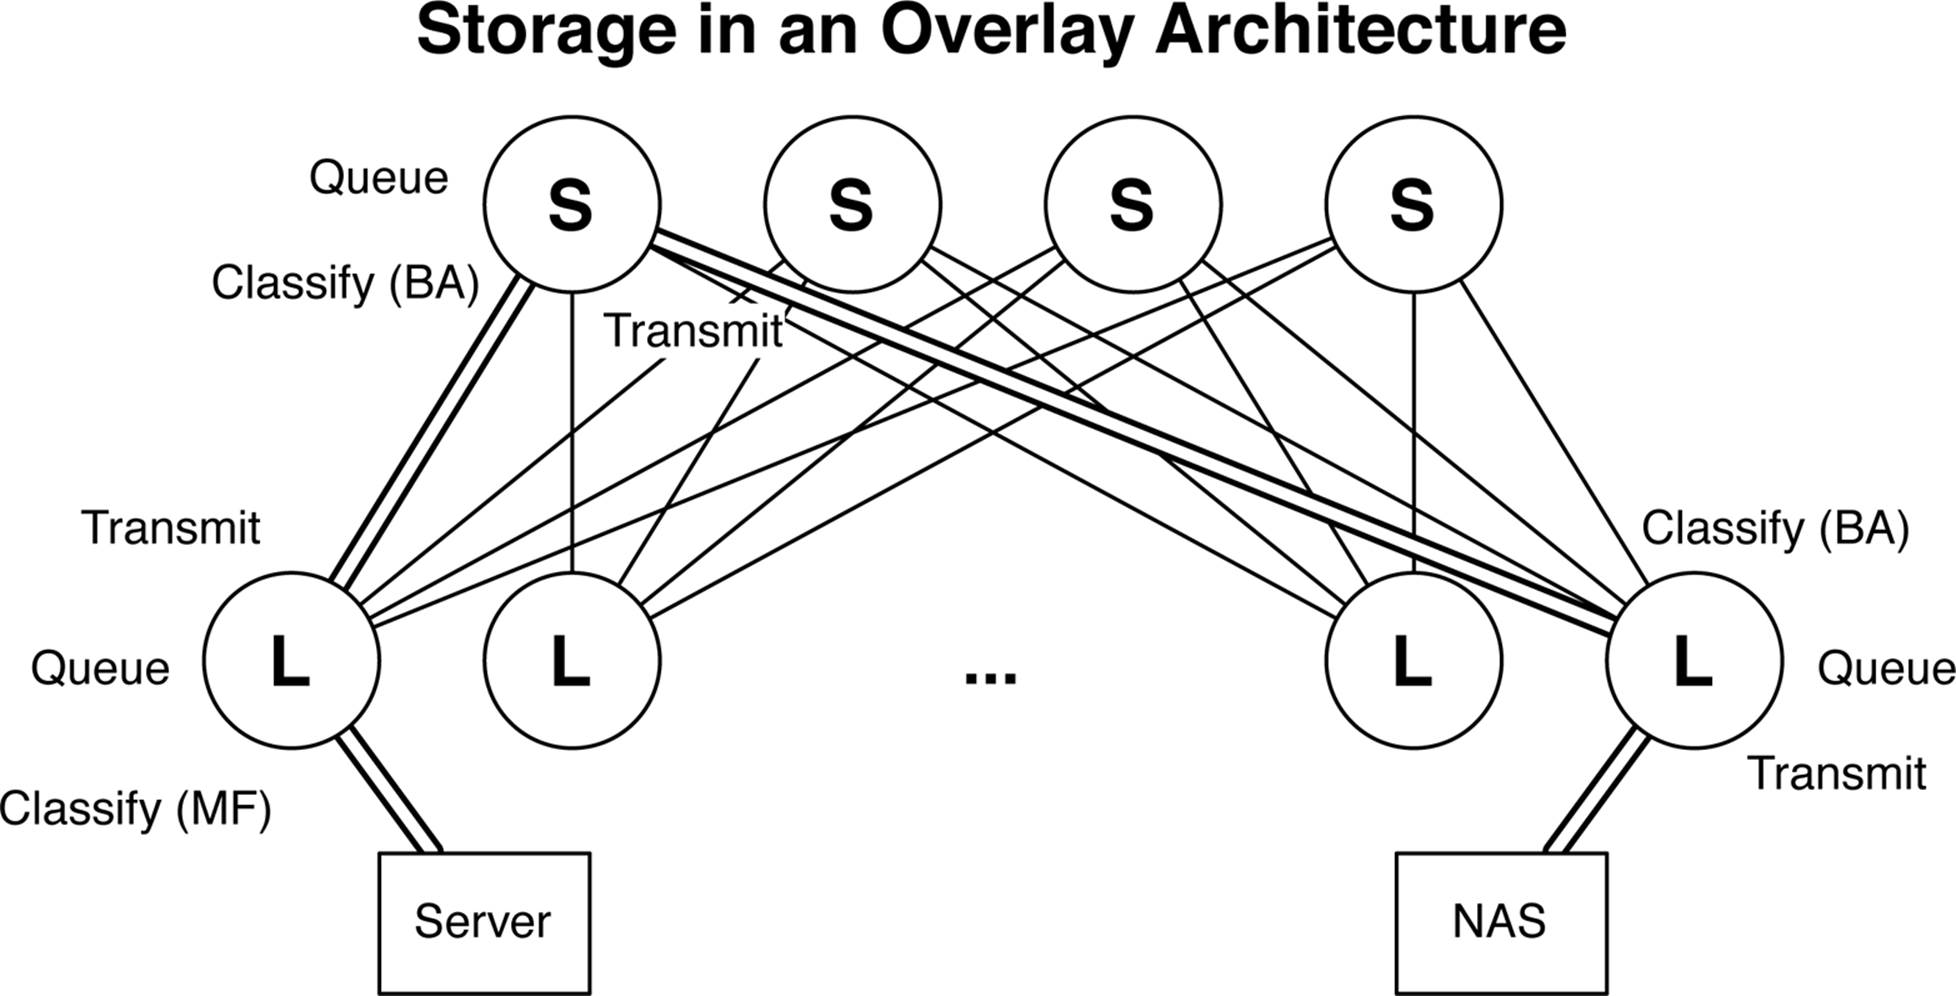 Storage in an overlay architecture